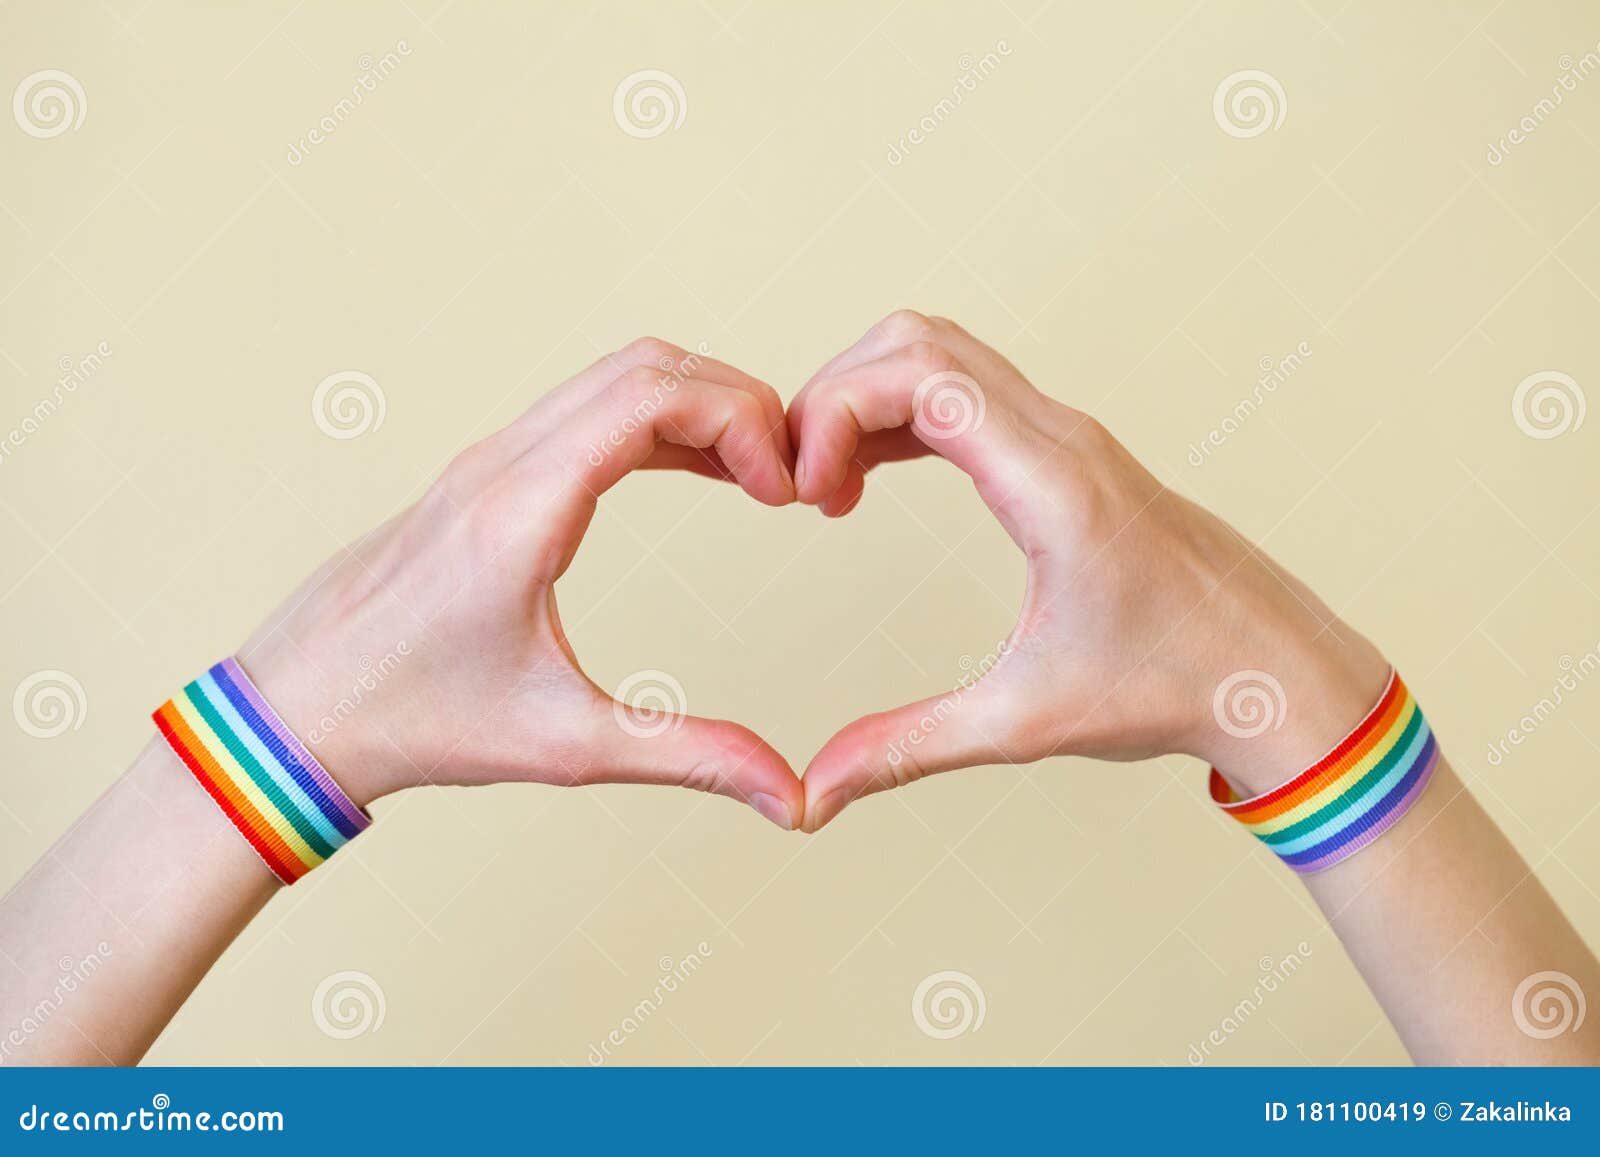 Young Woman`s Hands With Lgbt Colorful Rainbow Flag Wristbands Shaped